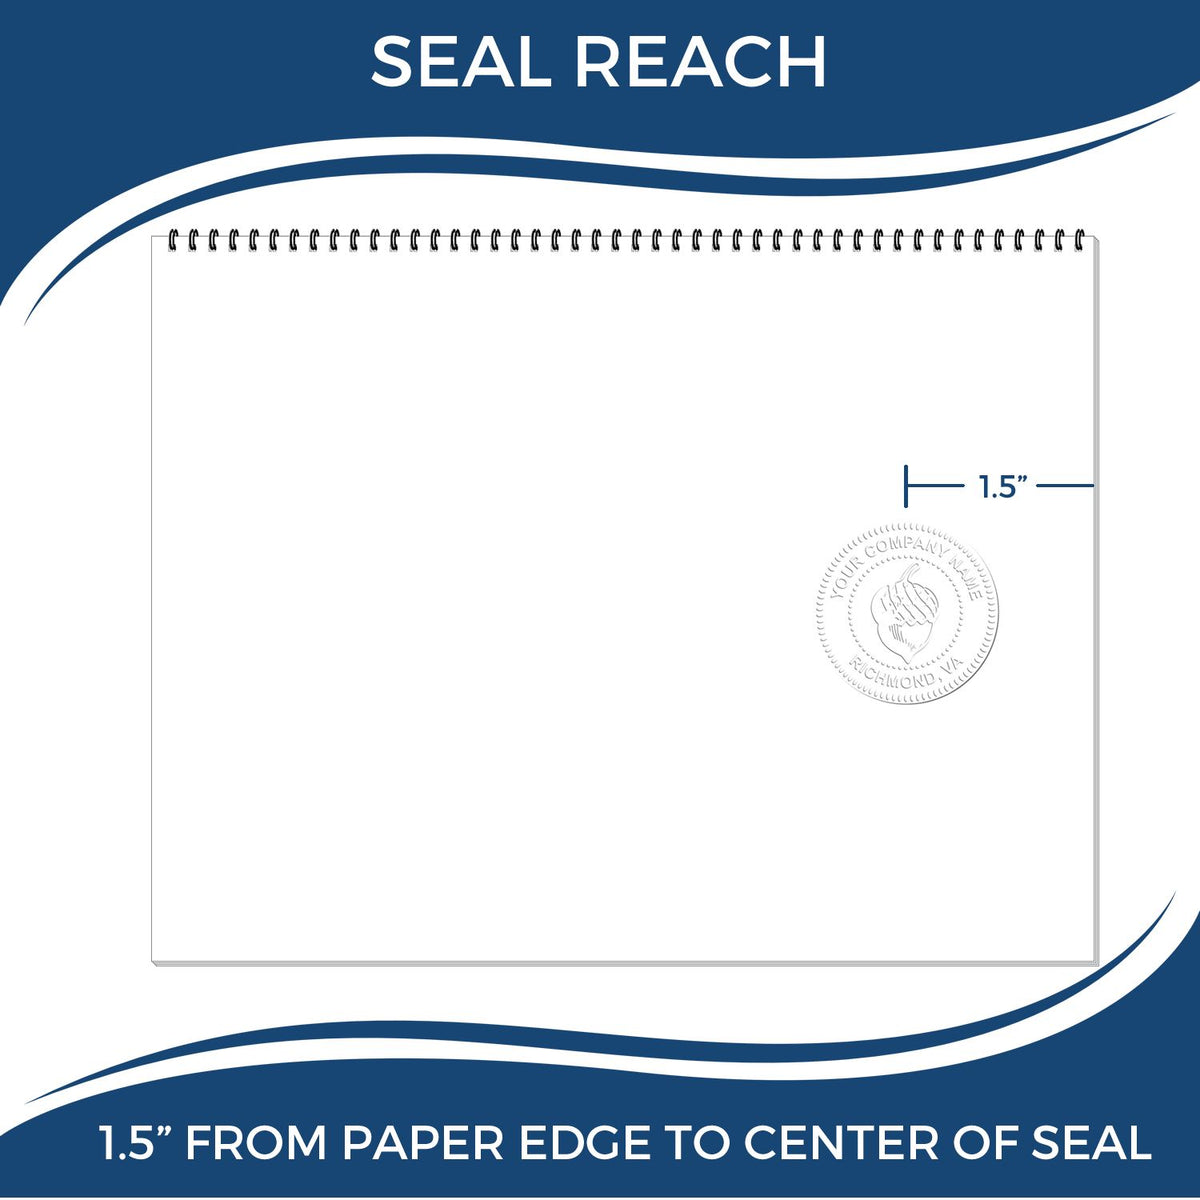 An infographic showing the seal reach which is represented by a ruler and a miniature seal image of the State of Kentucky Soft Land Surveyor Embossing Seal